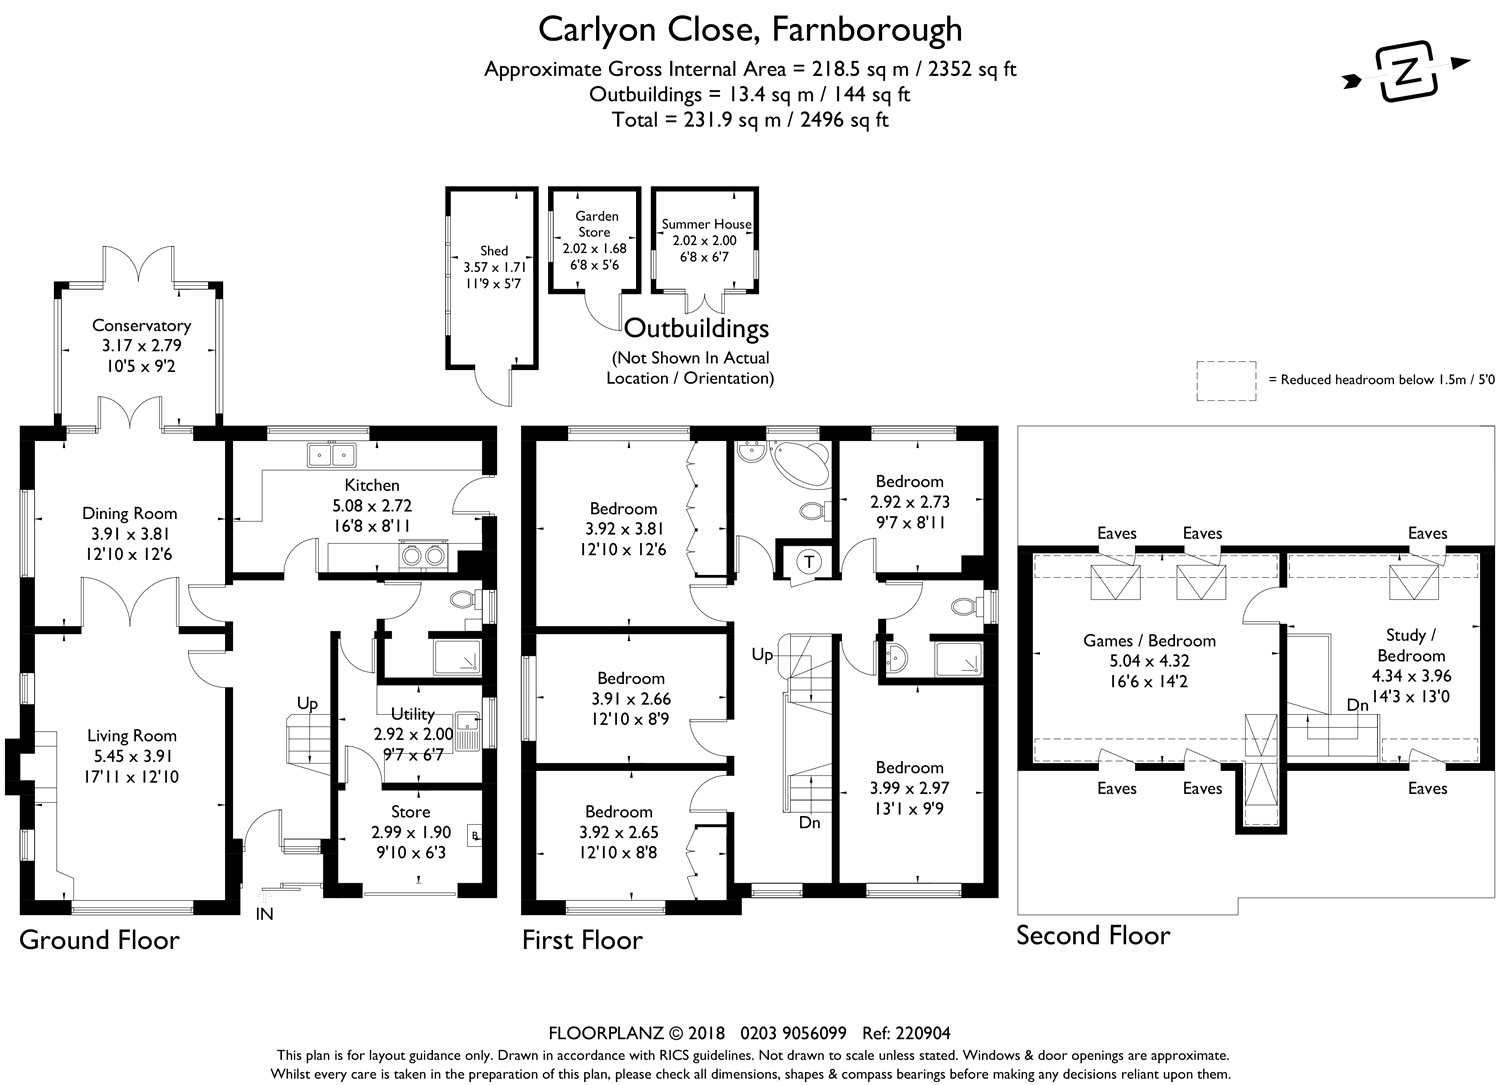 5 Bedrooms Detached house for sale in Carlyon Close, Farnborough, Hampshire GU14